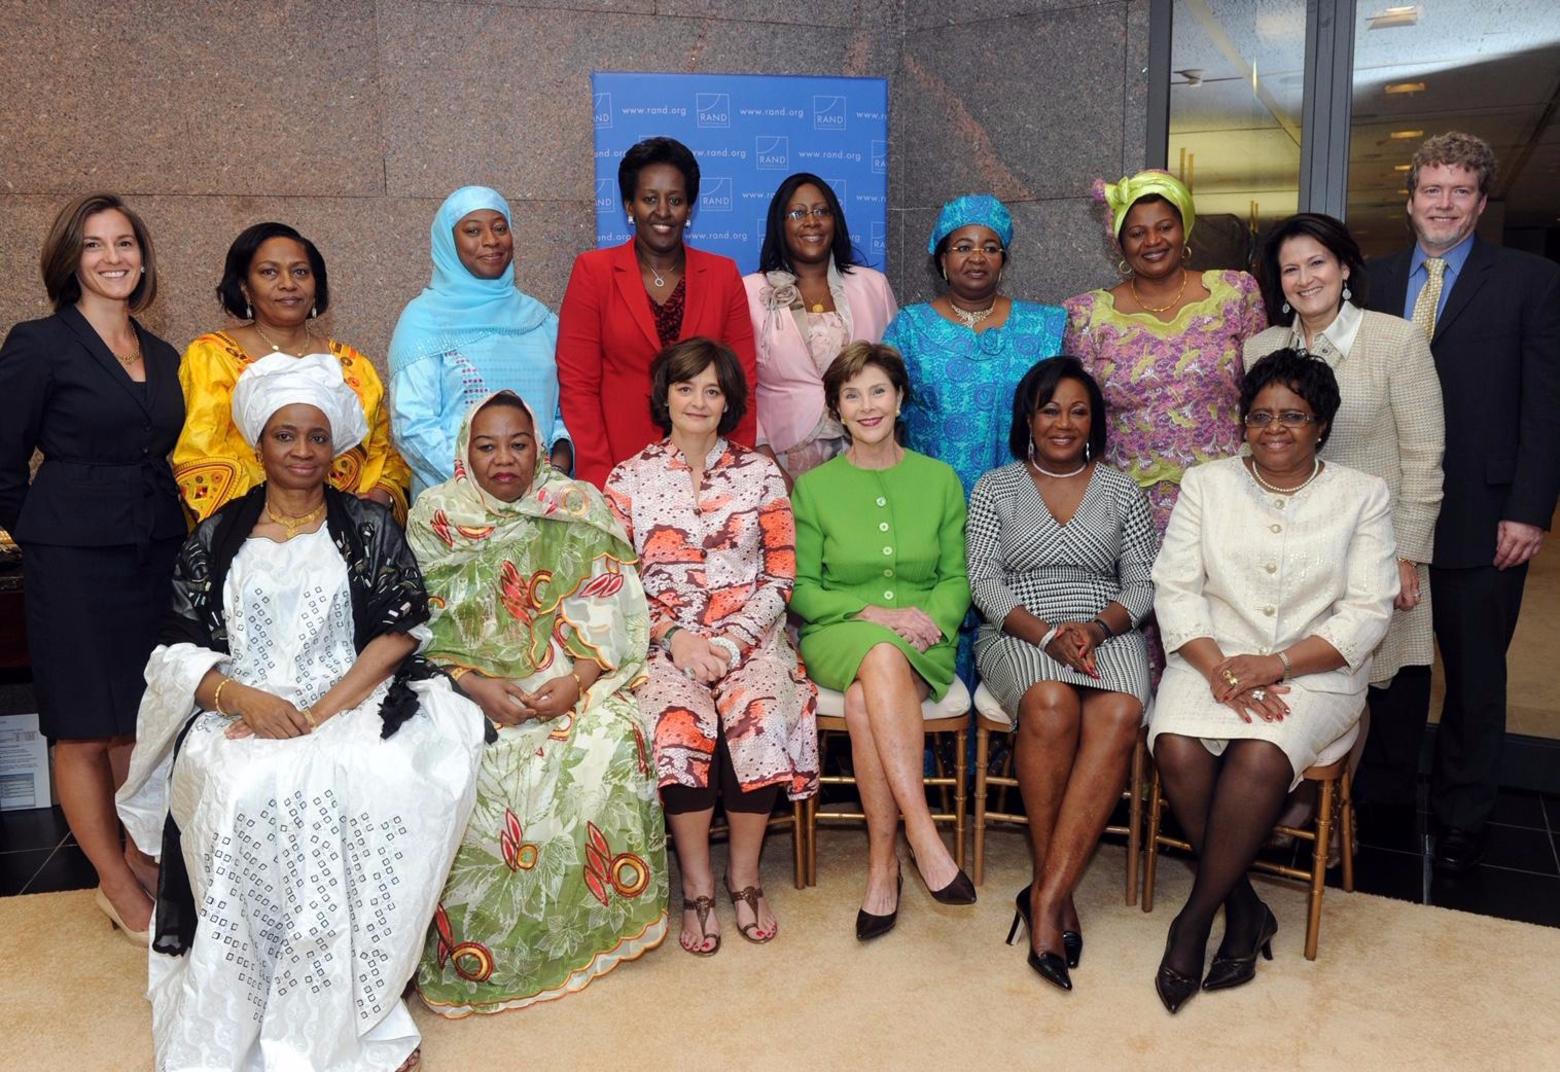 Neumann (top row, far left) with First Ladies from the world, including Laura Bush (center, in green). who are involved with a group she founded, the Global First Ladies Alliance. The organization includes First Ladies from six continents. Photo courtesy RAND